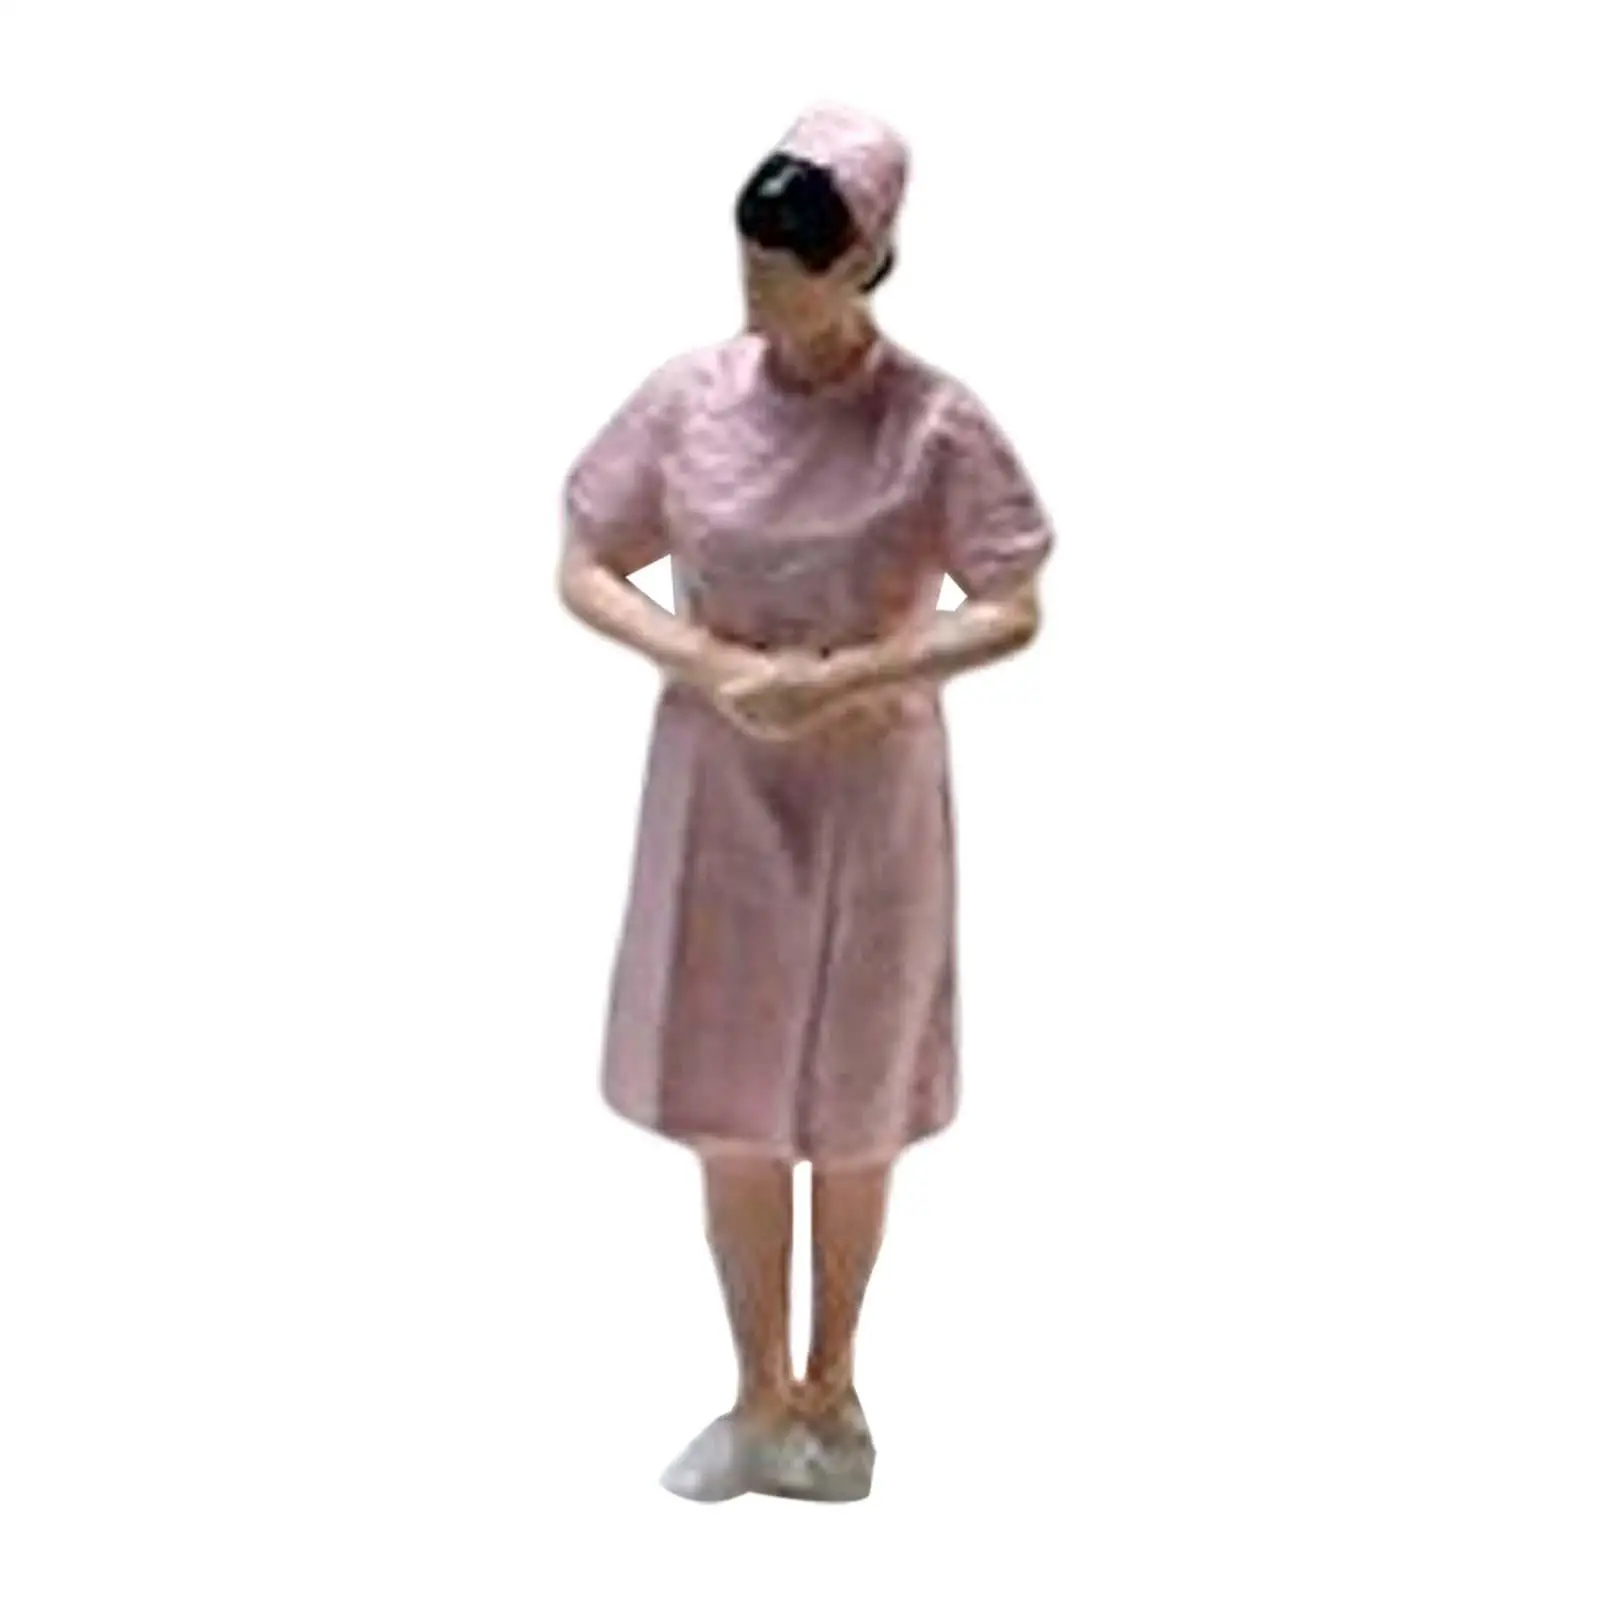 Hand Painted 1:64 Scale People Figure Photo Props Railroad Layout Small Person Sculpture Collectibles Dollhouse Accessories Pink